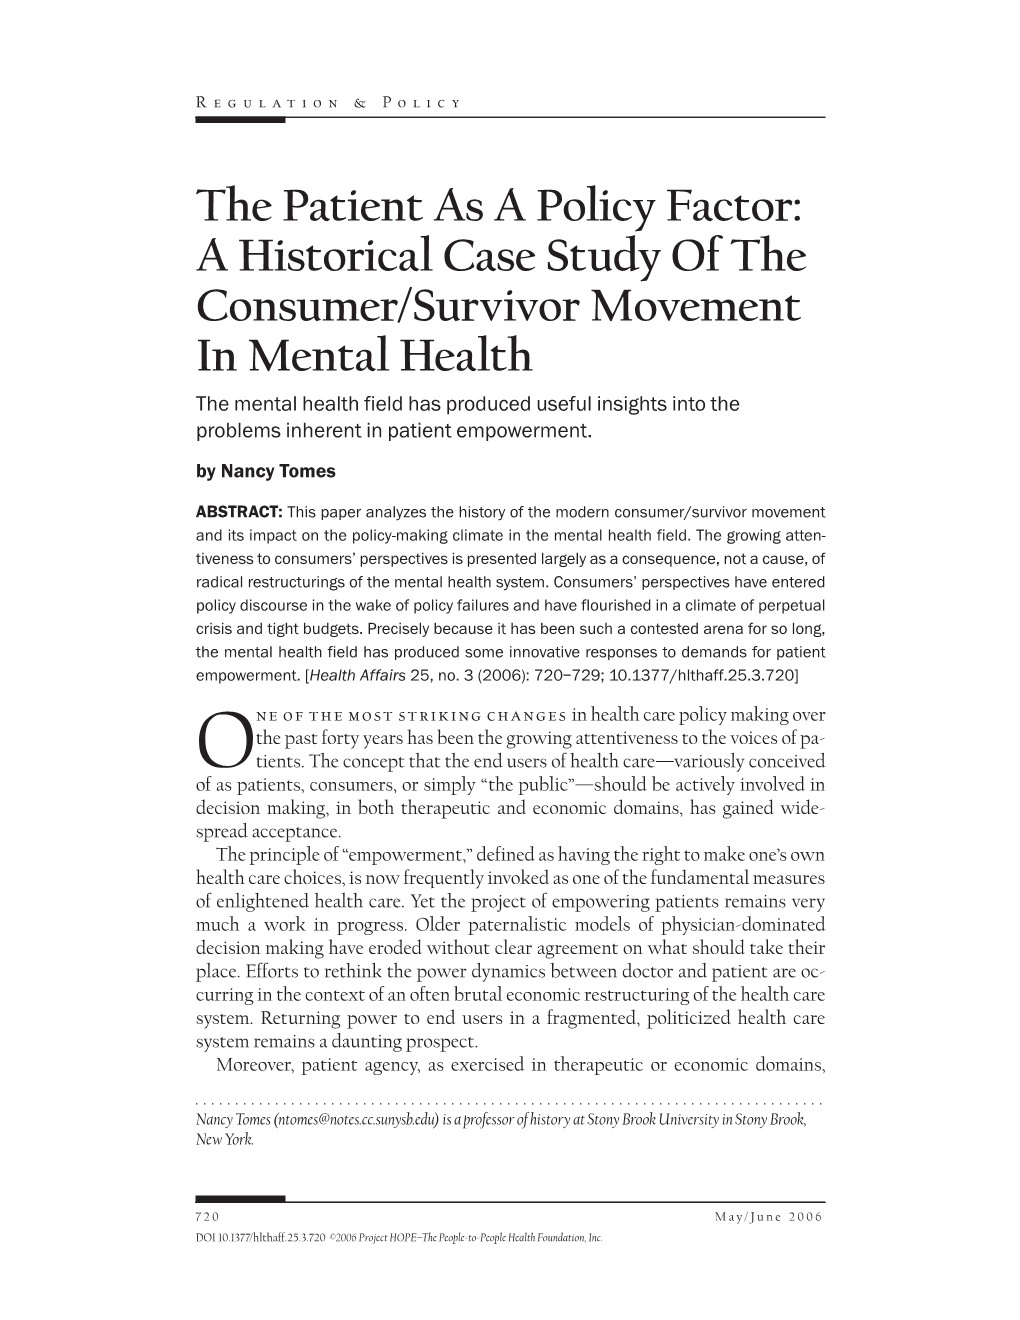 The Patient As a Policy Factor: a Historical Case Study Of